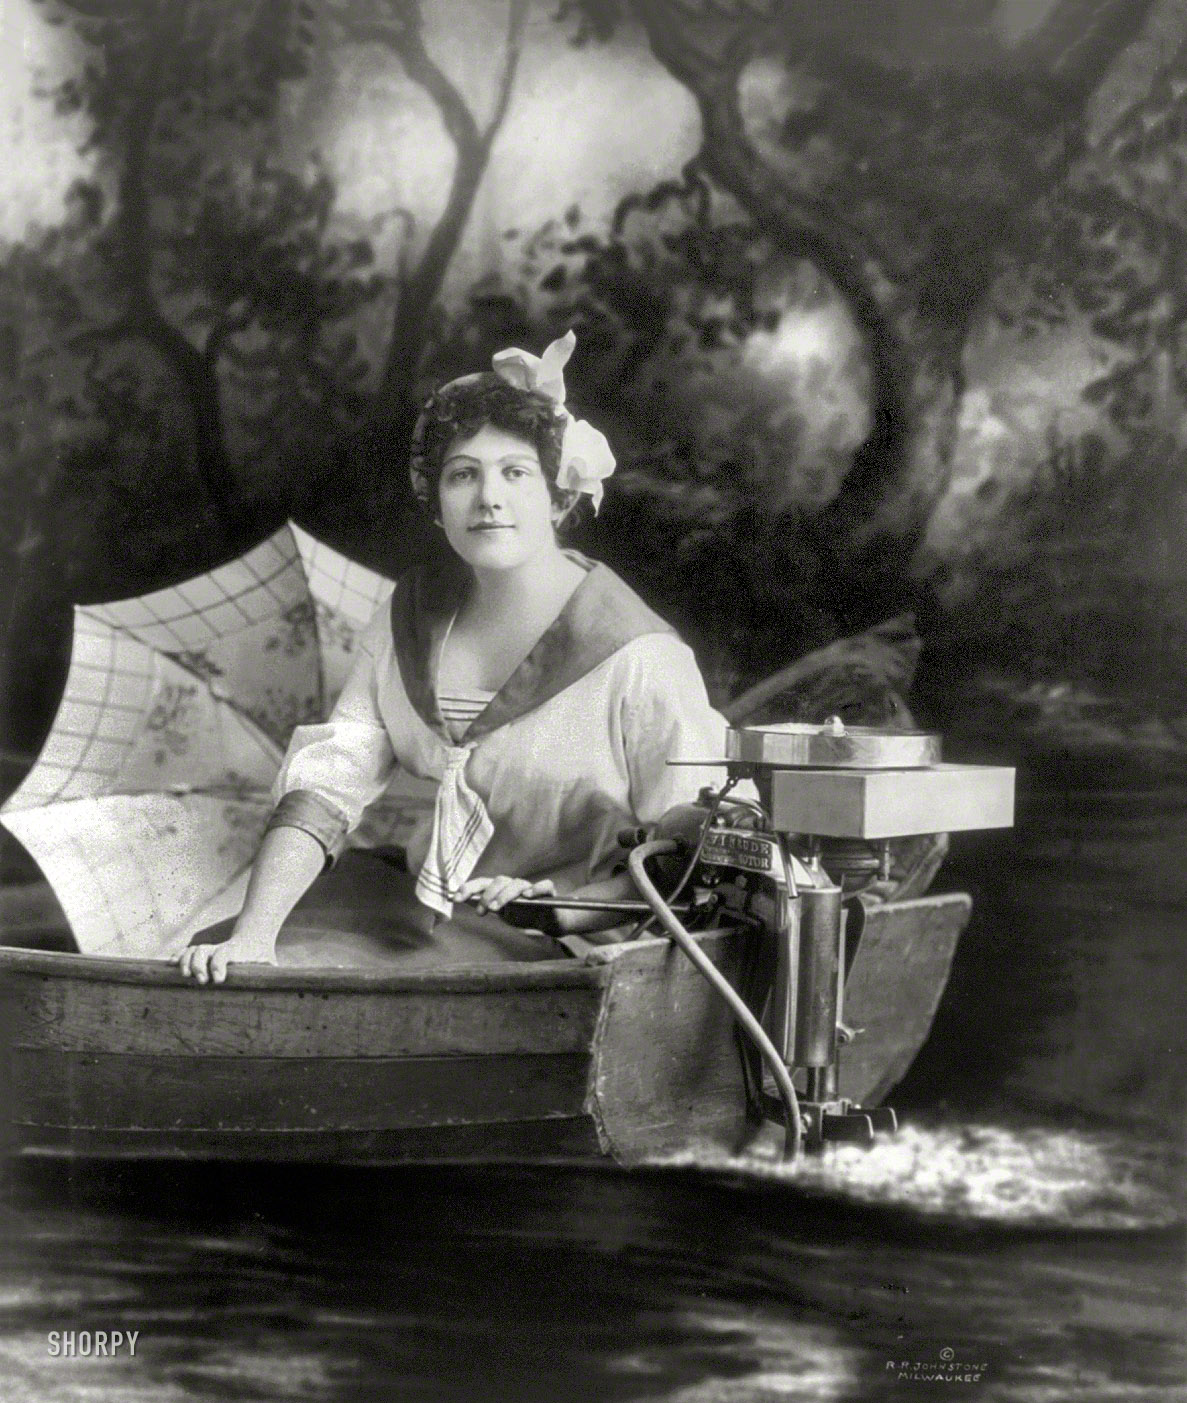 1913. "Young woman posed with an Evinrude outboard motor." Able to outrun any lad with a Johnson. R.R. Johnstone photo studio, Milwaukee. View full size.